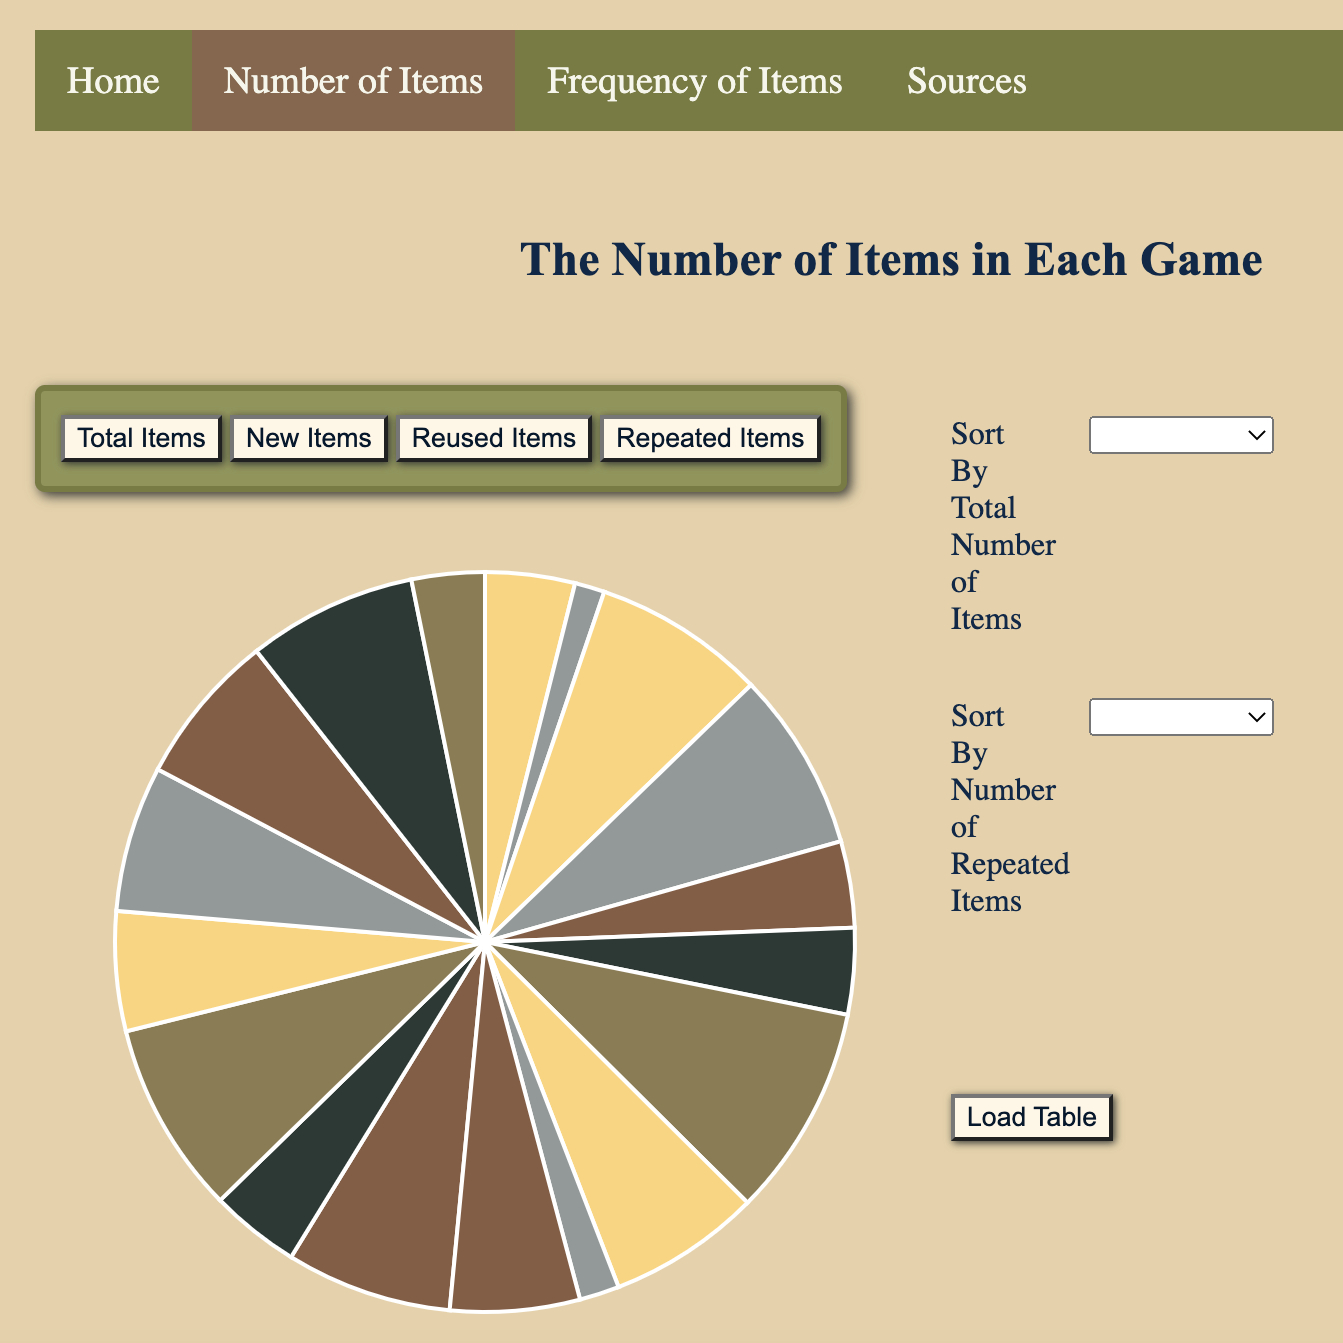 A screenshot from The Legends' Items website. It shows a cropped part of the Number of Items page, which includes a pie chart and several sorting options.